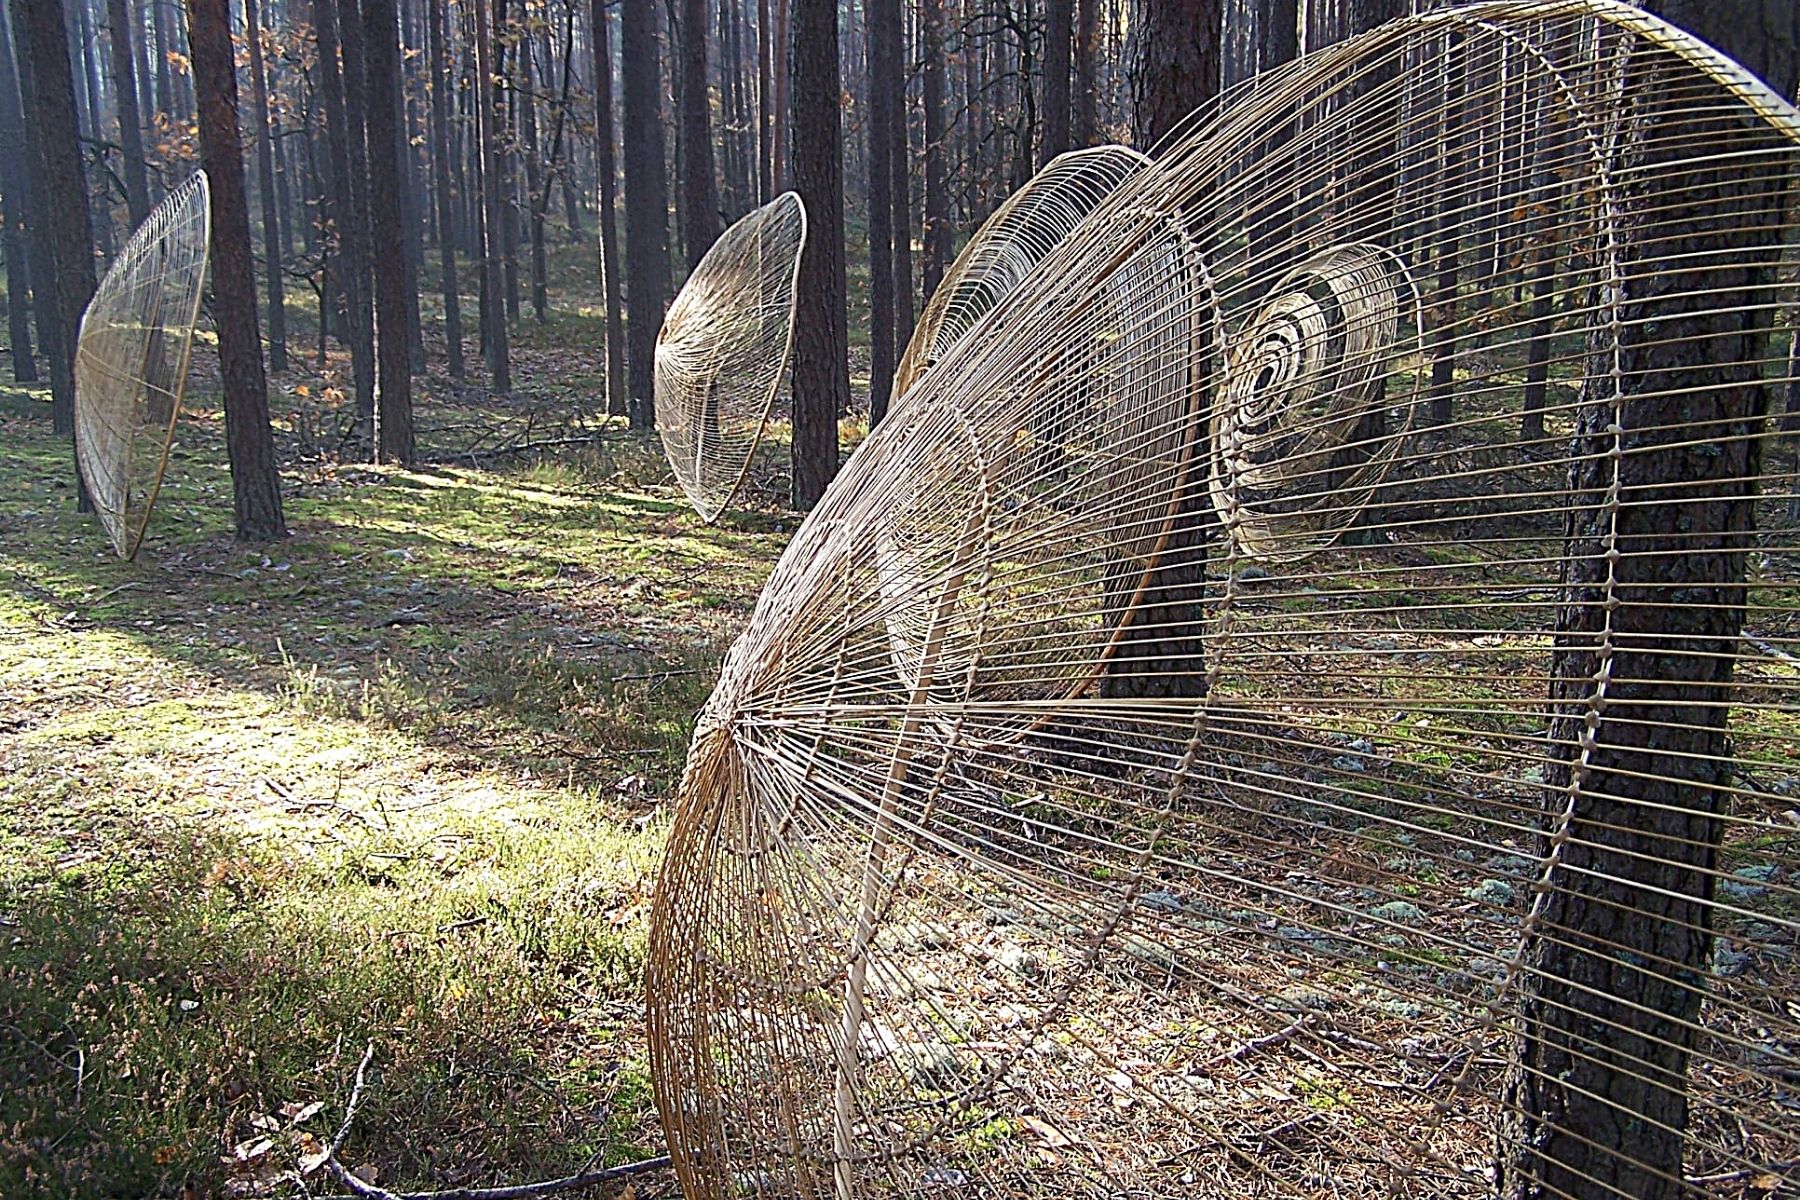 Land Art Is Miroslaw Maszlanko's Passion - An Unlimited Patience to Create Diffraction - Article on Thursd 